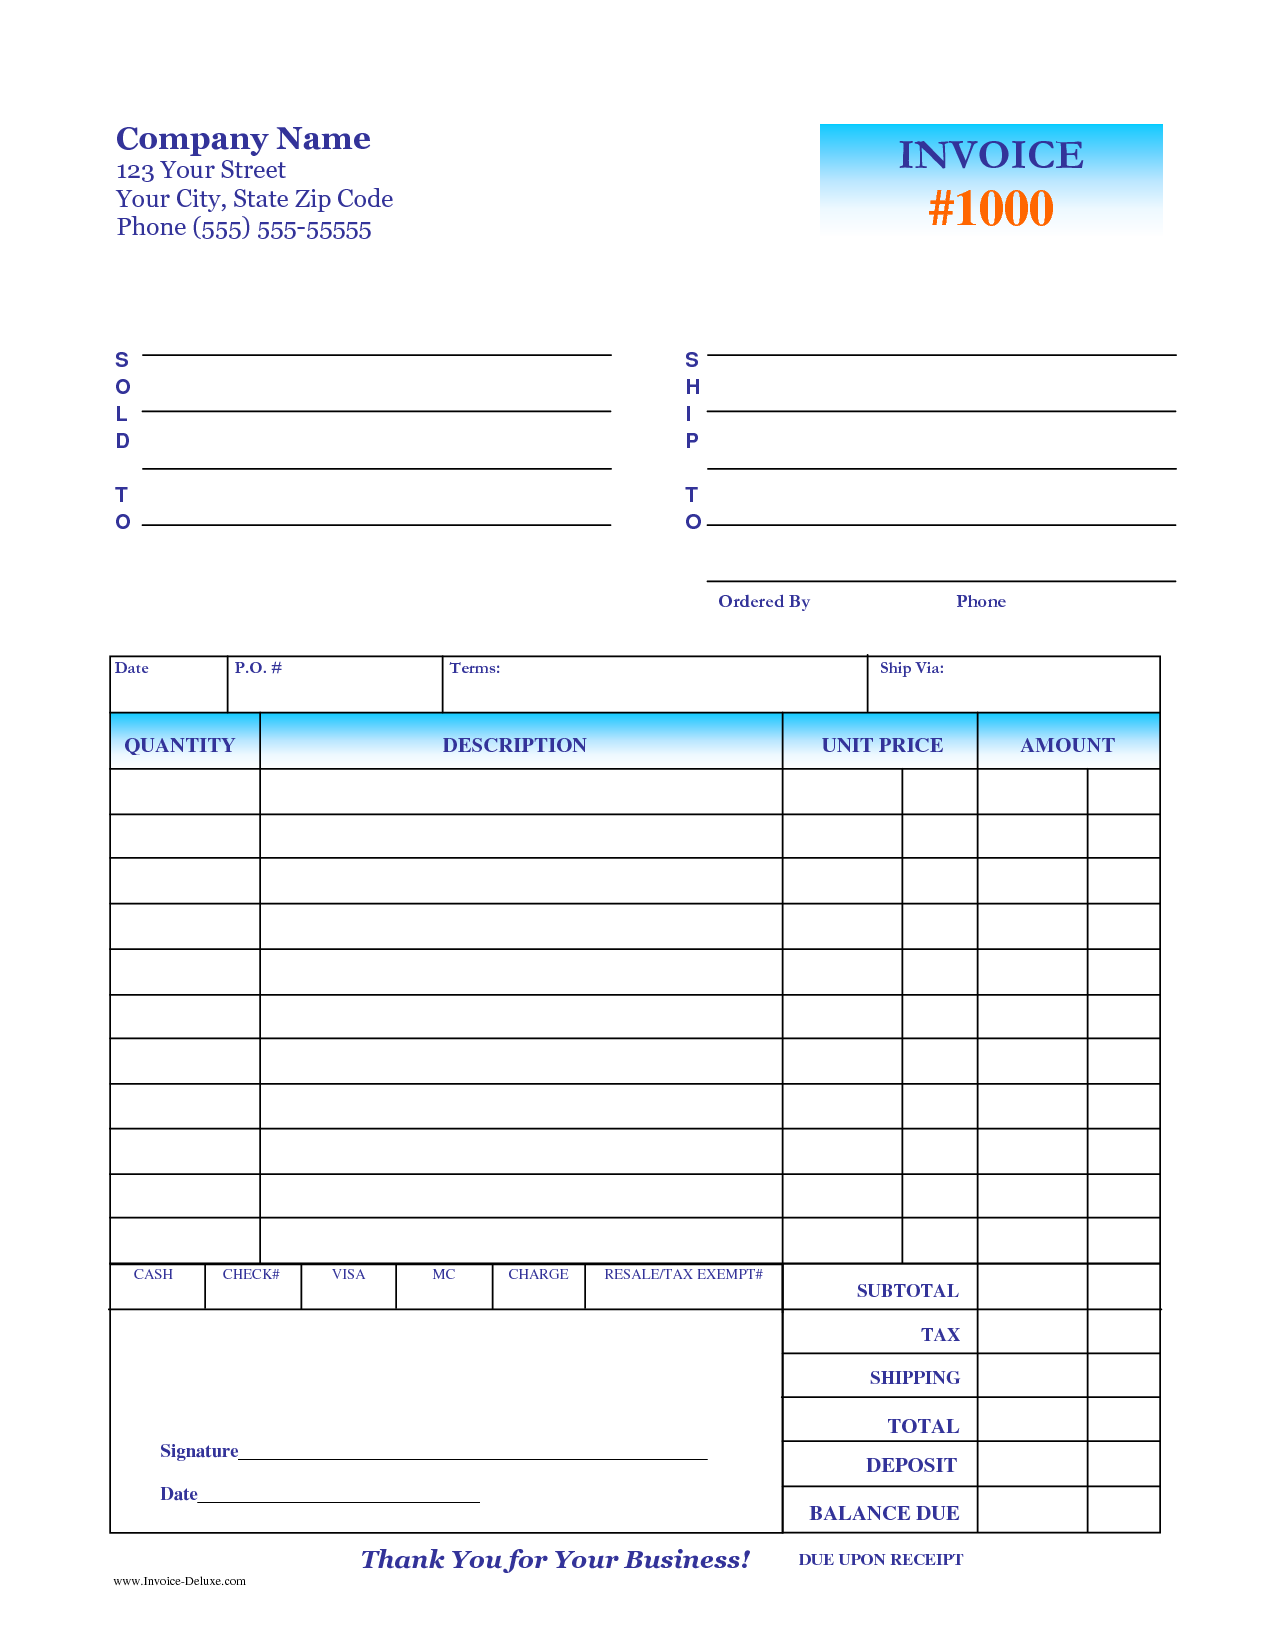 Deposit Invoice Template Printable Word, Excel Invoice Templates 